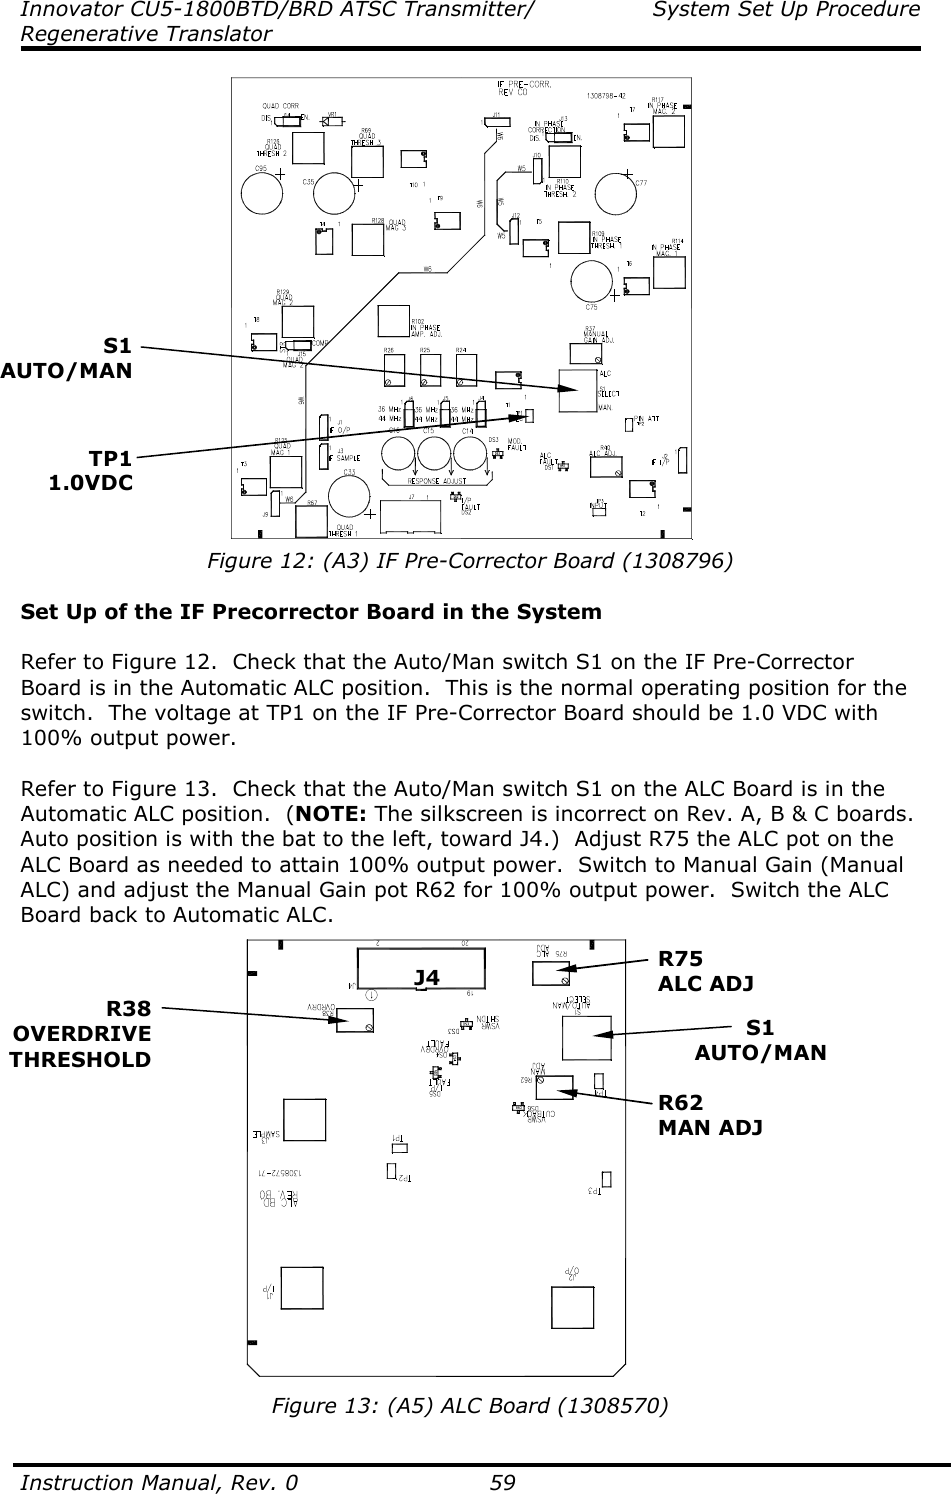 Innovator CU5-1800BTD/BRD ATSC Transmitter/  System Set Up Procedure Regenerative Translator  Instruction Manual, Rev. 0    59  Figure 12: (A3) IF Pre-Corrector Board (1308796)  Set Up of the IF Precorrector Board in the System  Refer to Figure 12.  Check that the Auto/Man switch S1 on the IF Pre-Corrector Board is in the Automatic ALC position.  This is the normal operating position for the switch.  The voltage at TP1 on the IF Pre-Corrector Board should be 1.0 VDC with 100% output power.  Refer to Figure 13.  Check that the Auto/Man switch S1 on the ALC Board is in the Automatic ALC position.  (NOTE: The silkscreen is incorrect on Rev. A, B &amp; C boards.  Auto position is with the bat to the left, toward J4.)  Adjust R75 the ALC pot on the ALC Board as needed to attain 100% output power.  Switch to Manual Gain (Manual ALC) and adjust the Manual Gain pot R62 for 100% output power.  Switch the ALC Board back to Automatic ALC.   Figure 13: (A5) ALC Board (1308570) S1 AUTO/MAN S1 AUTO/MAN TP1 1.0VDC J4 R75 ALC ADJ R62 MAN ADJ R38 OVERDRIVE THRESHOLD 